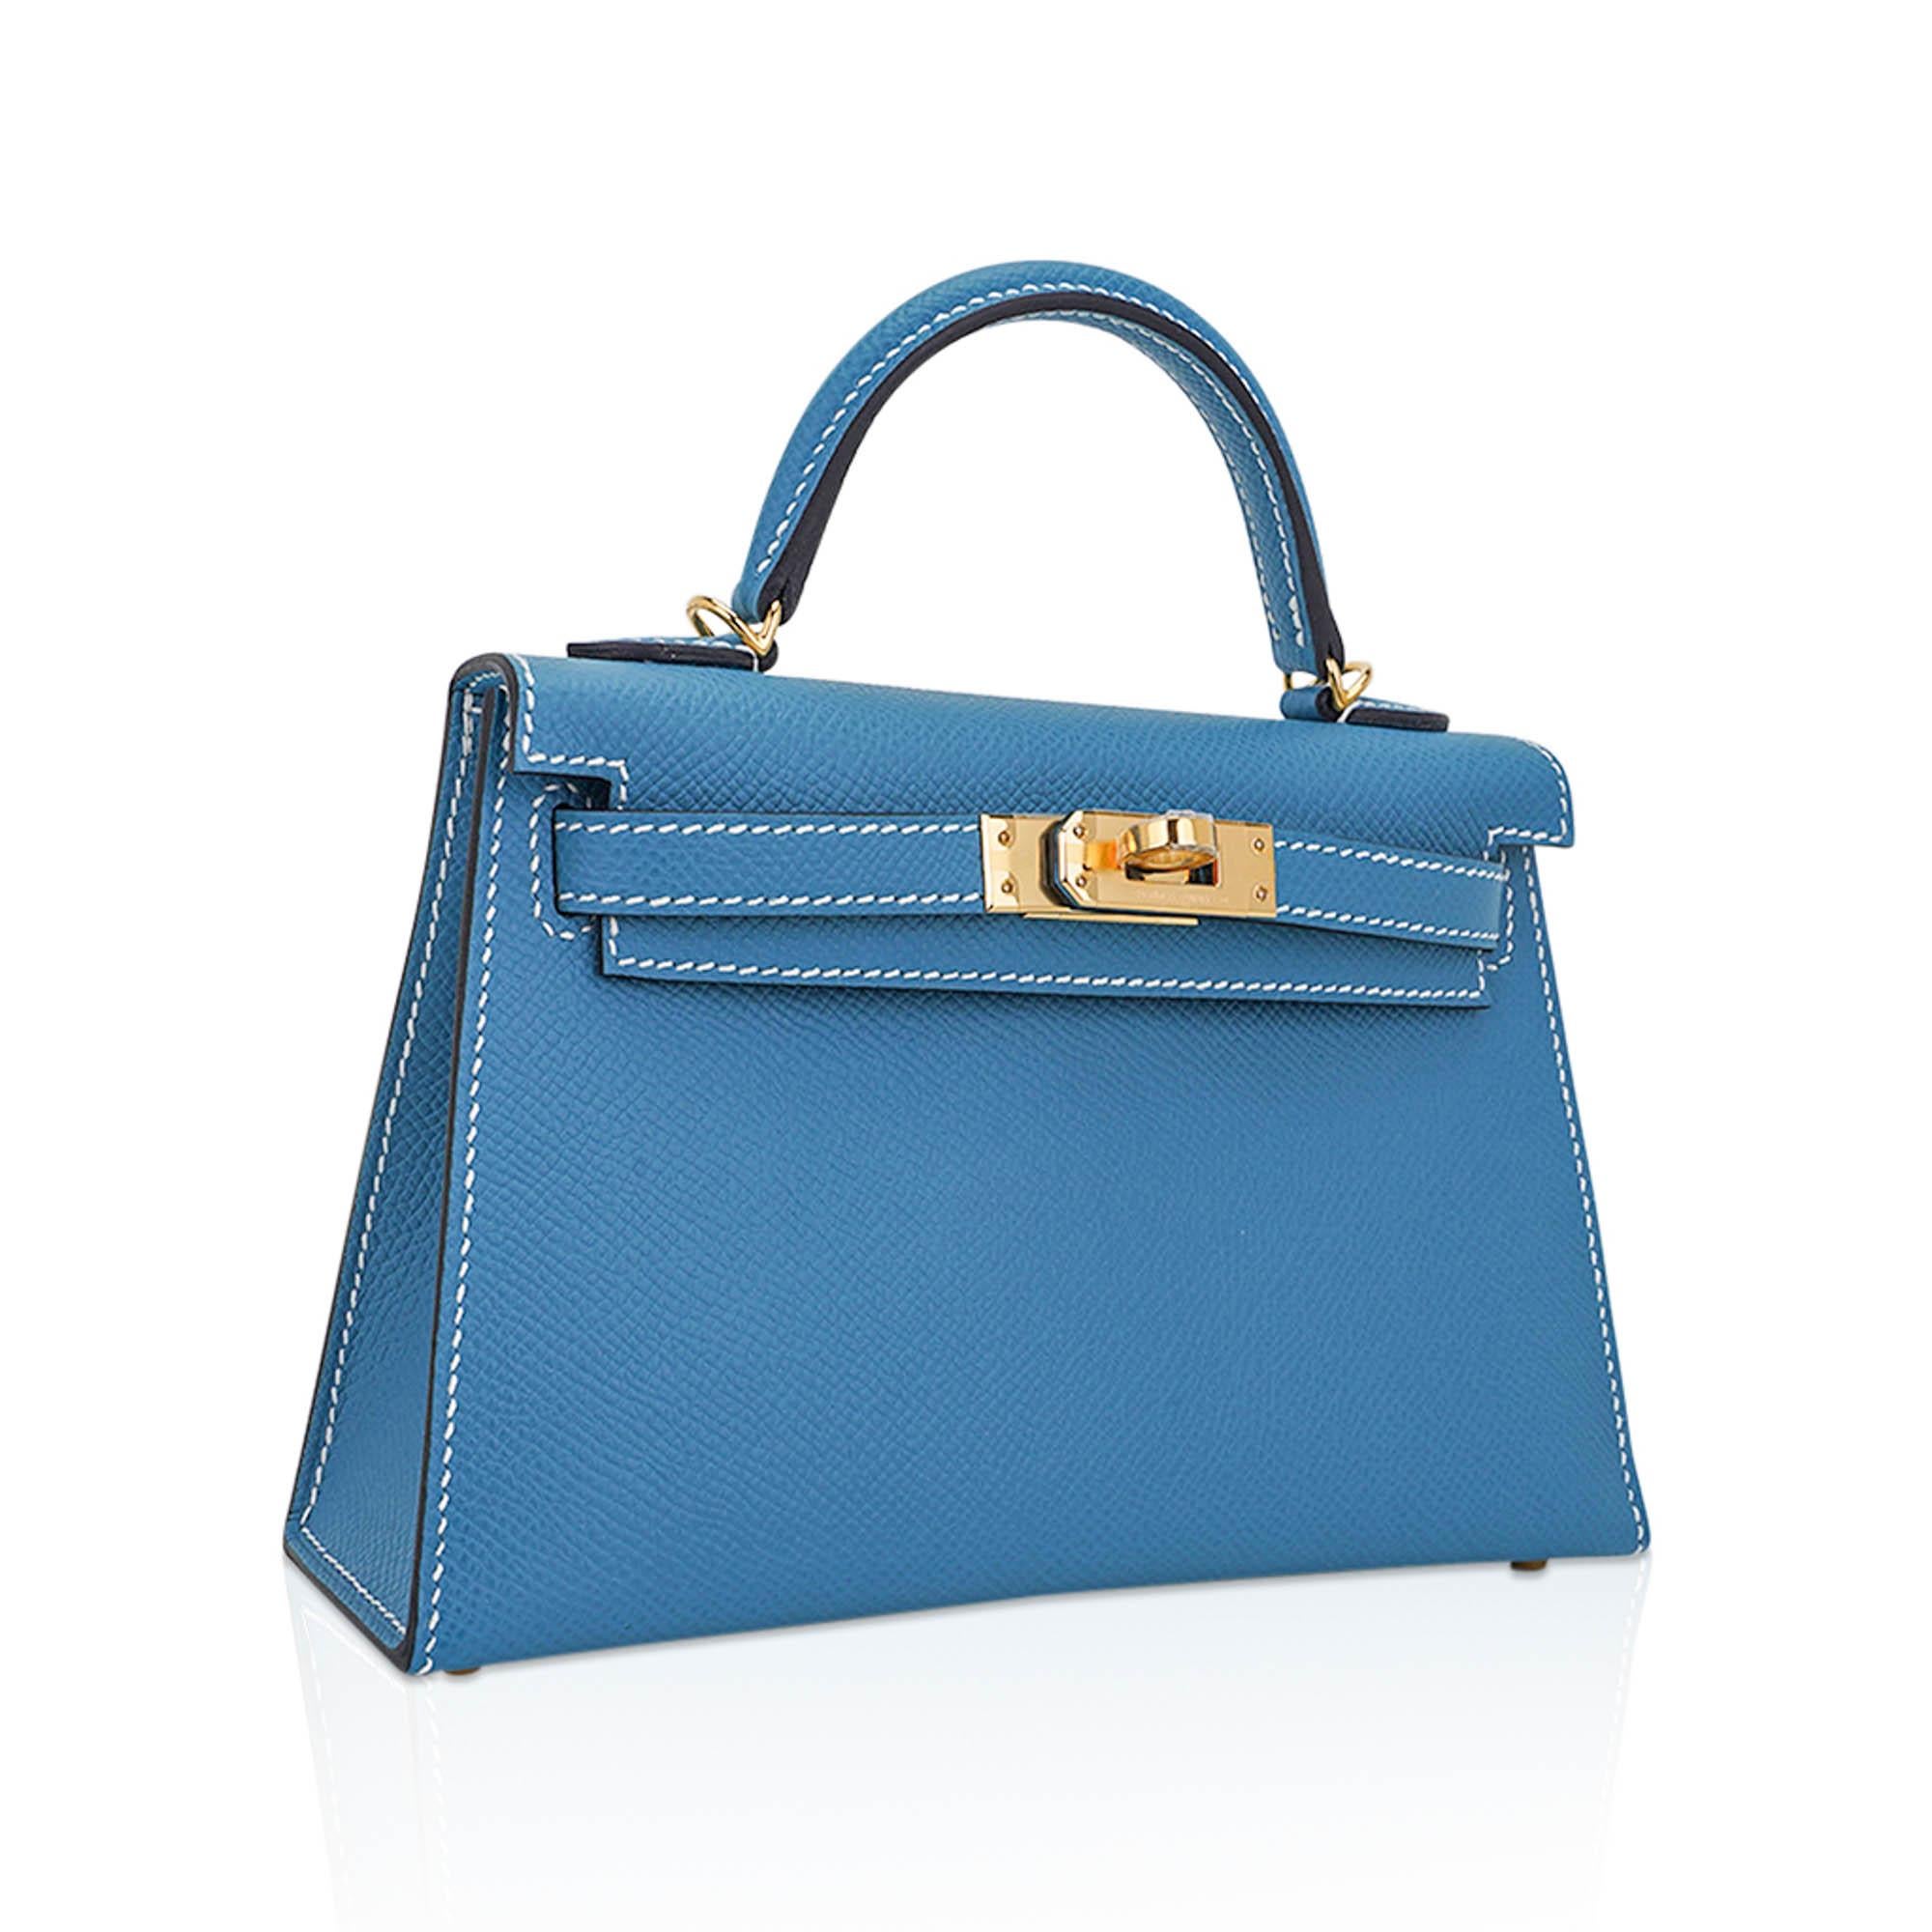 Mightychic offers an Hermes Kelly 20 Mini Sellier bag featured in New Bleu Jean.  
The iconic Hermes Blue Jean is finally reintroduced in limited quantity and is gorgeous for year round wear, and completely neutral.
Espom leather accentuated with